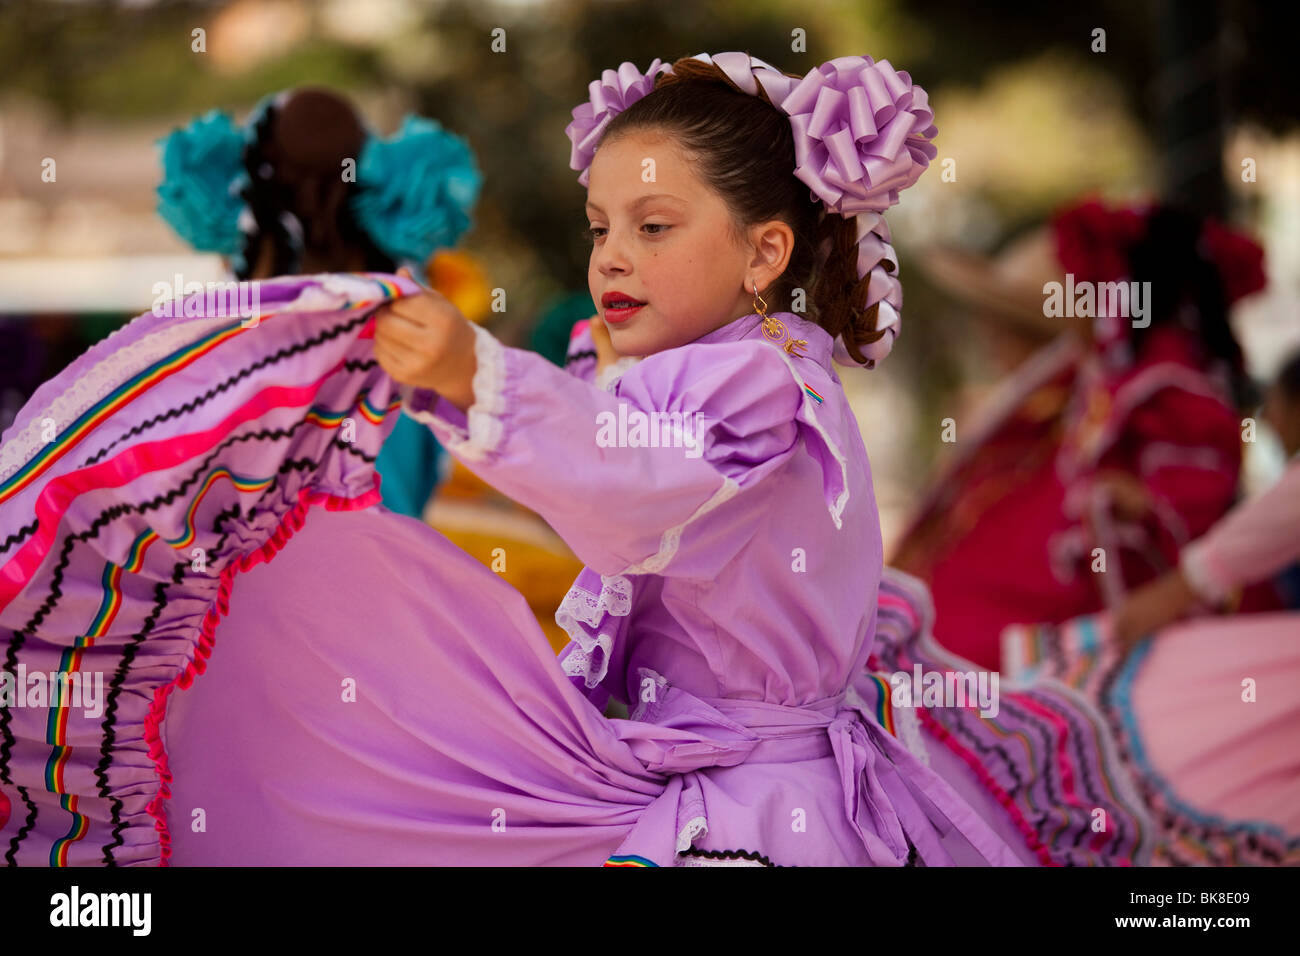 Traditional Mexican Dance at The Blessing of the Animals Festival, Olvera Street, Downtown Los Angeles, California, United States of America Stock Photo